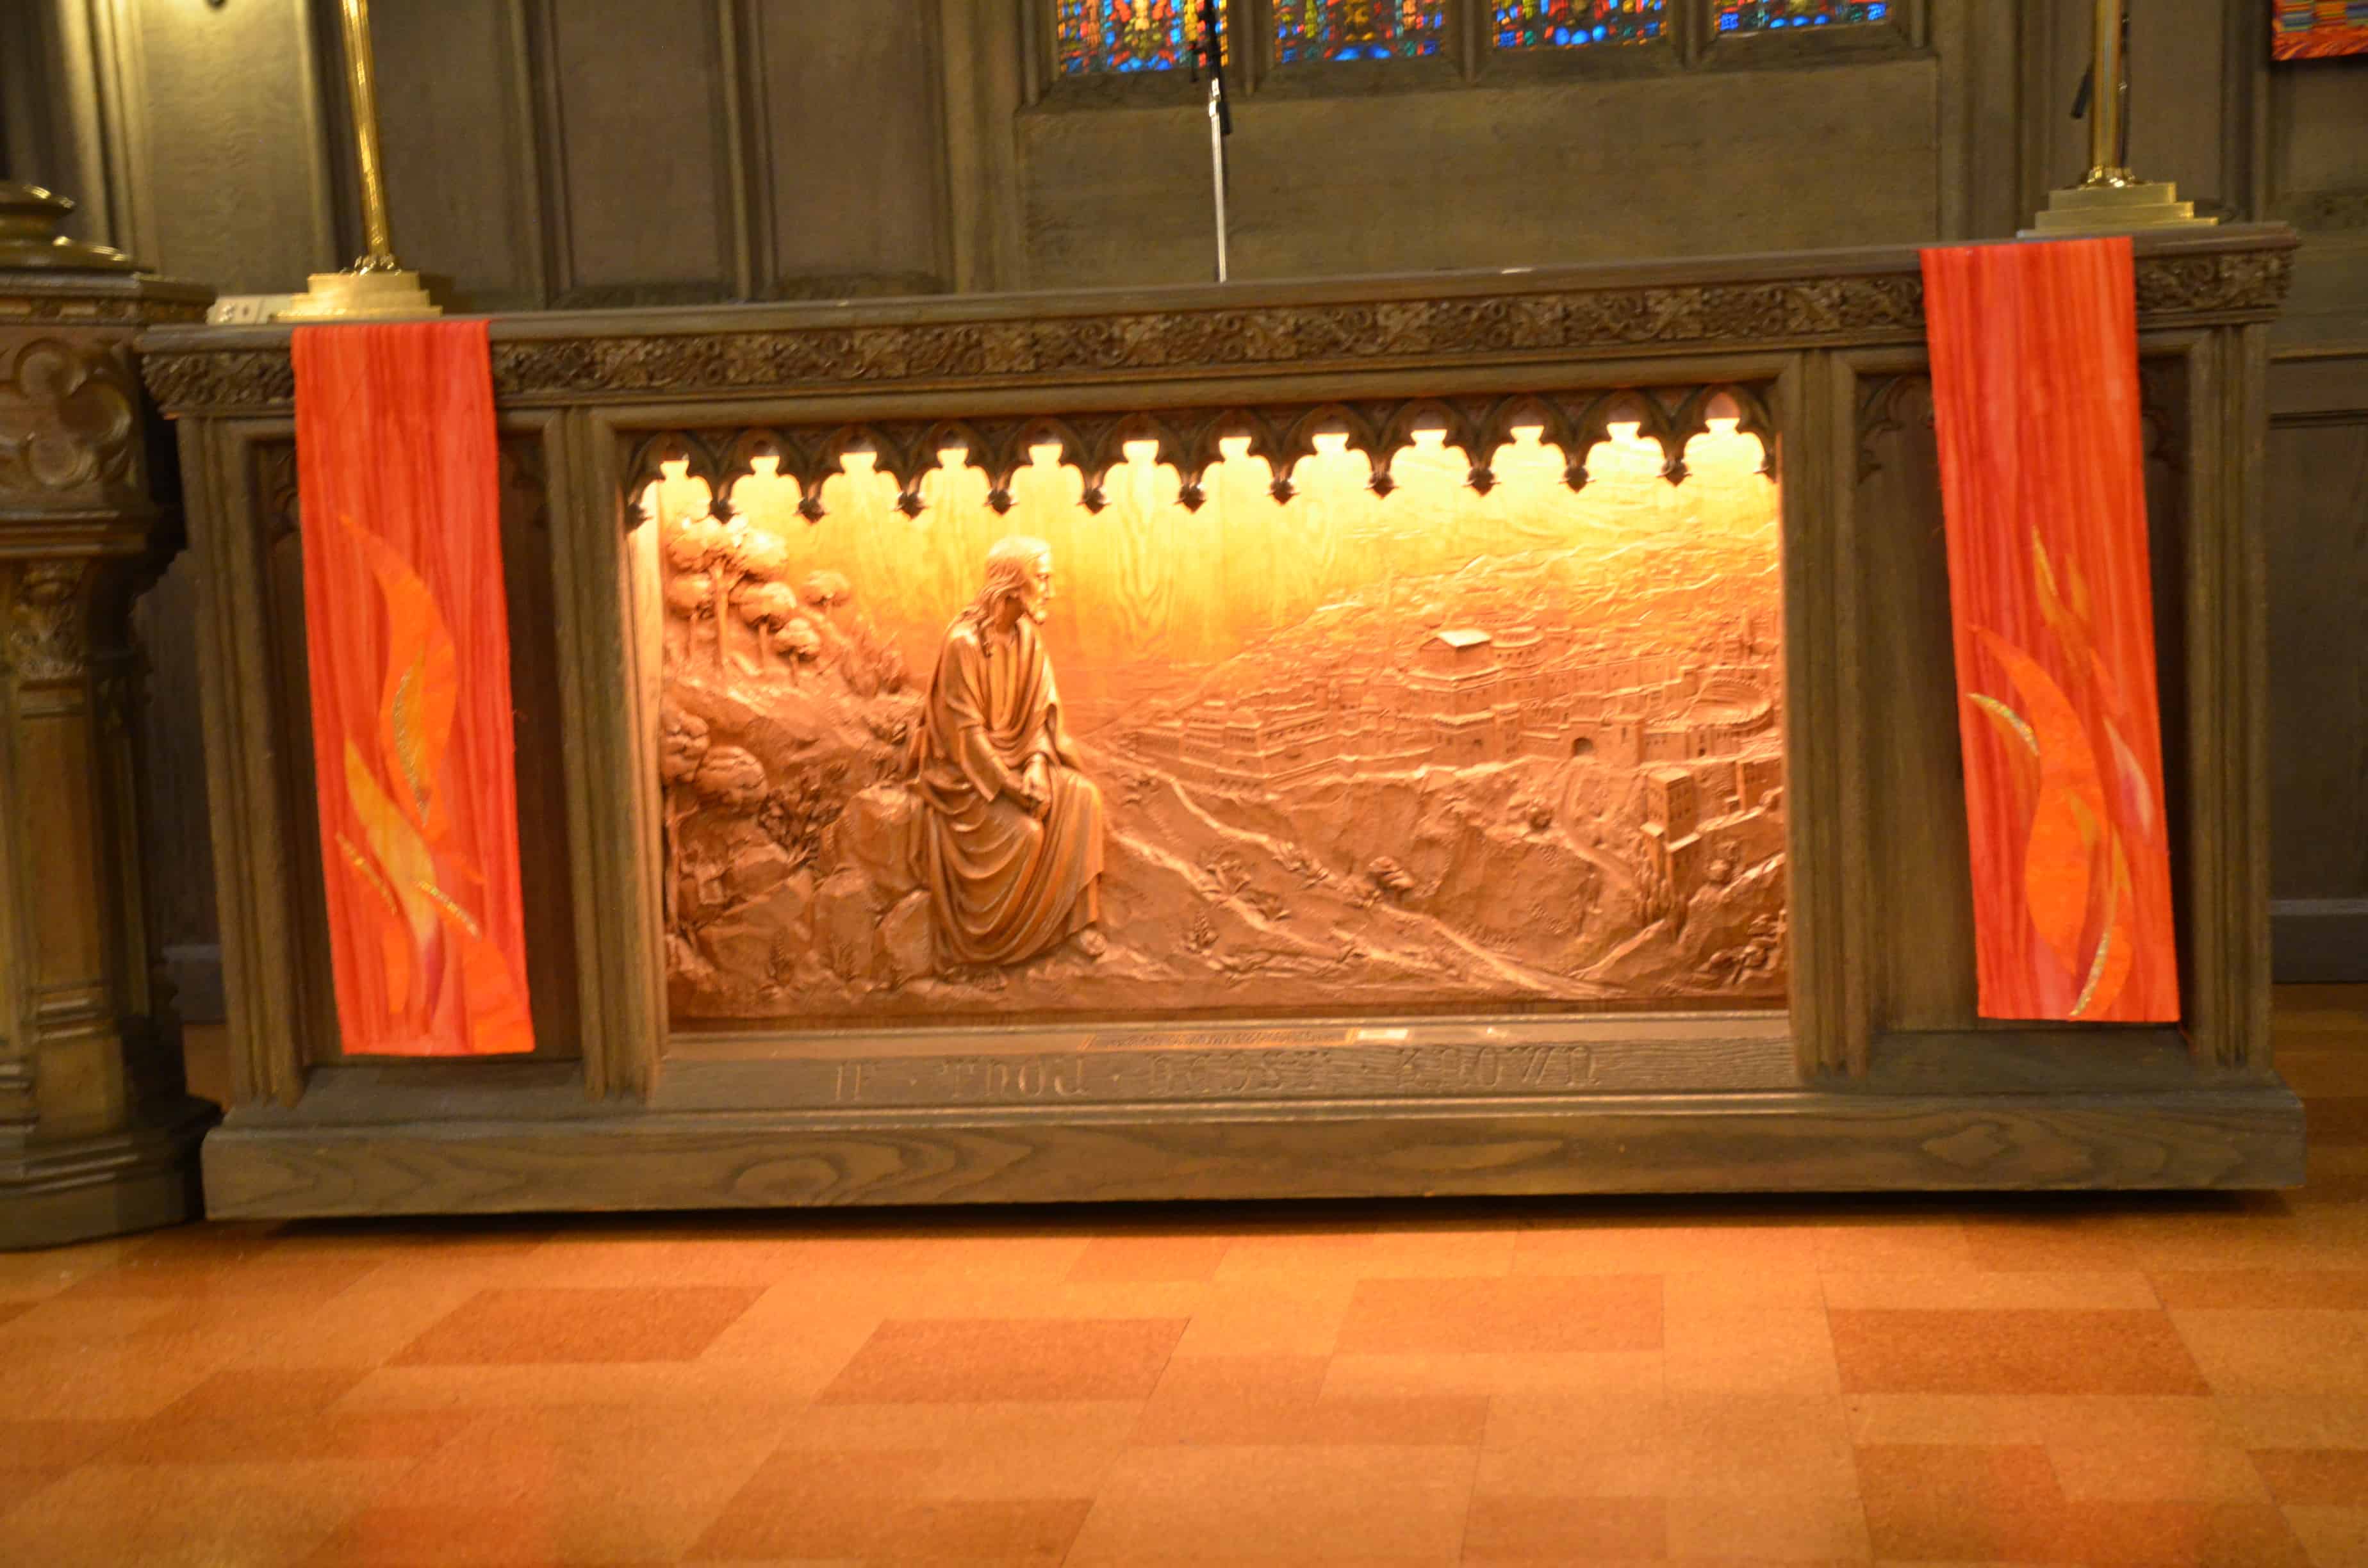 Christ weeping over Jerusalem in the First United Methodist Church at the Chicago Temple in Chicago, Illinois